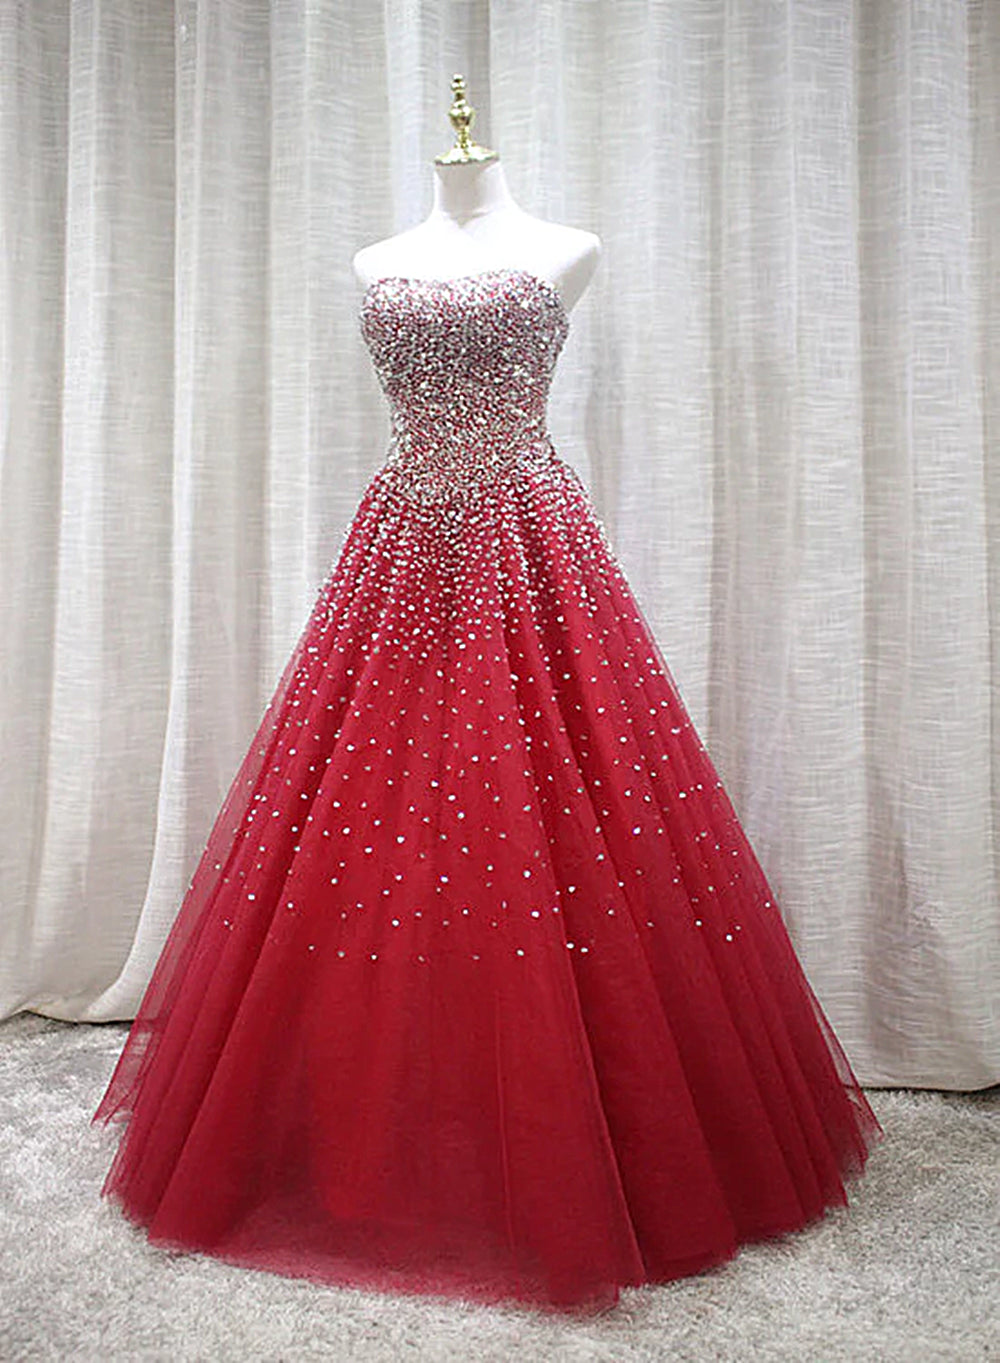 Red Sparkle Prom Dress Outfits For Women , Handmade Charming Formal Gown, Prom Dress